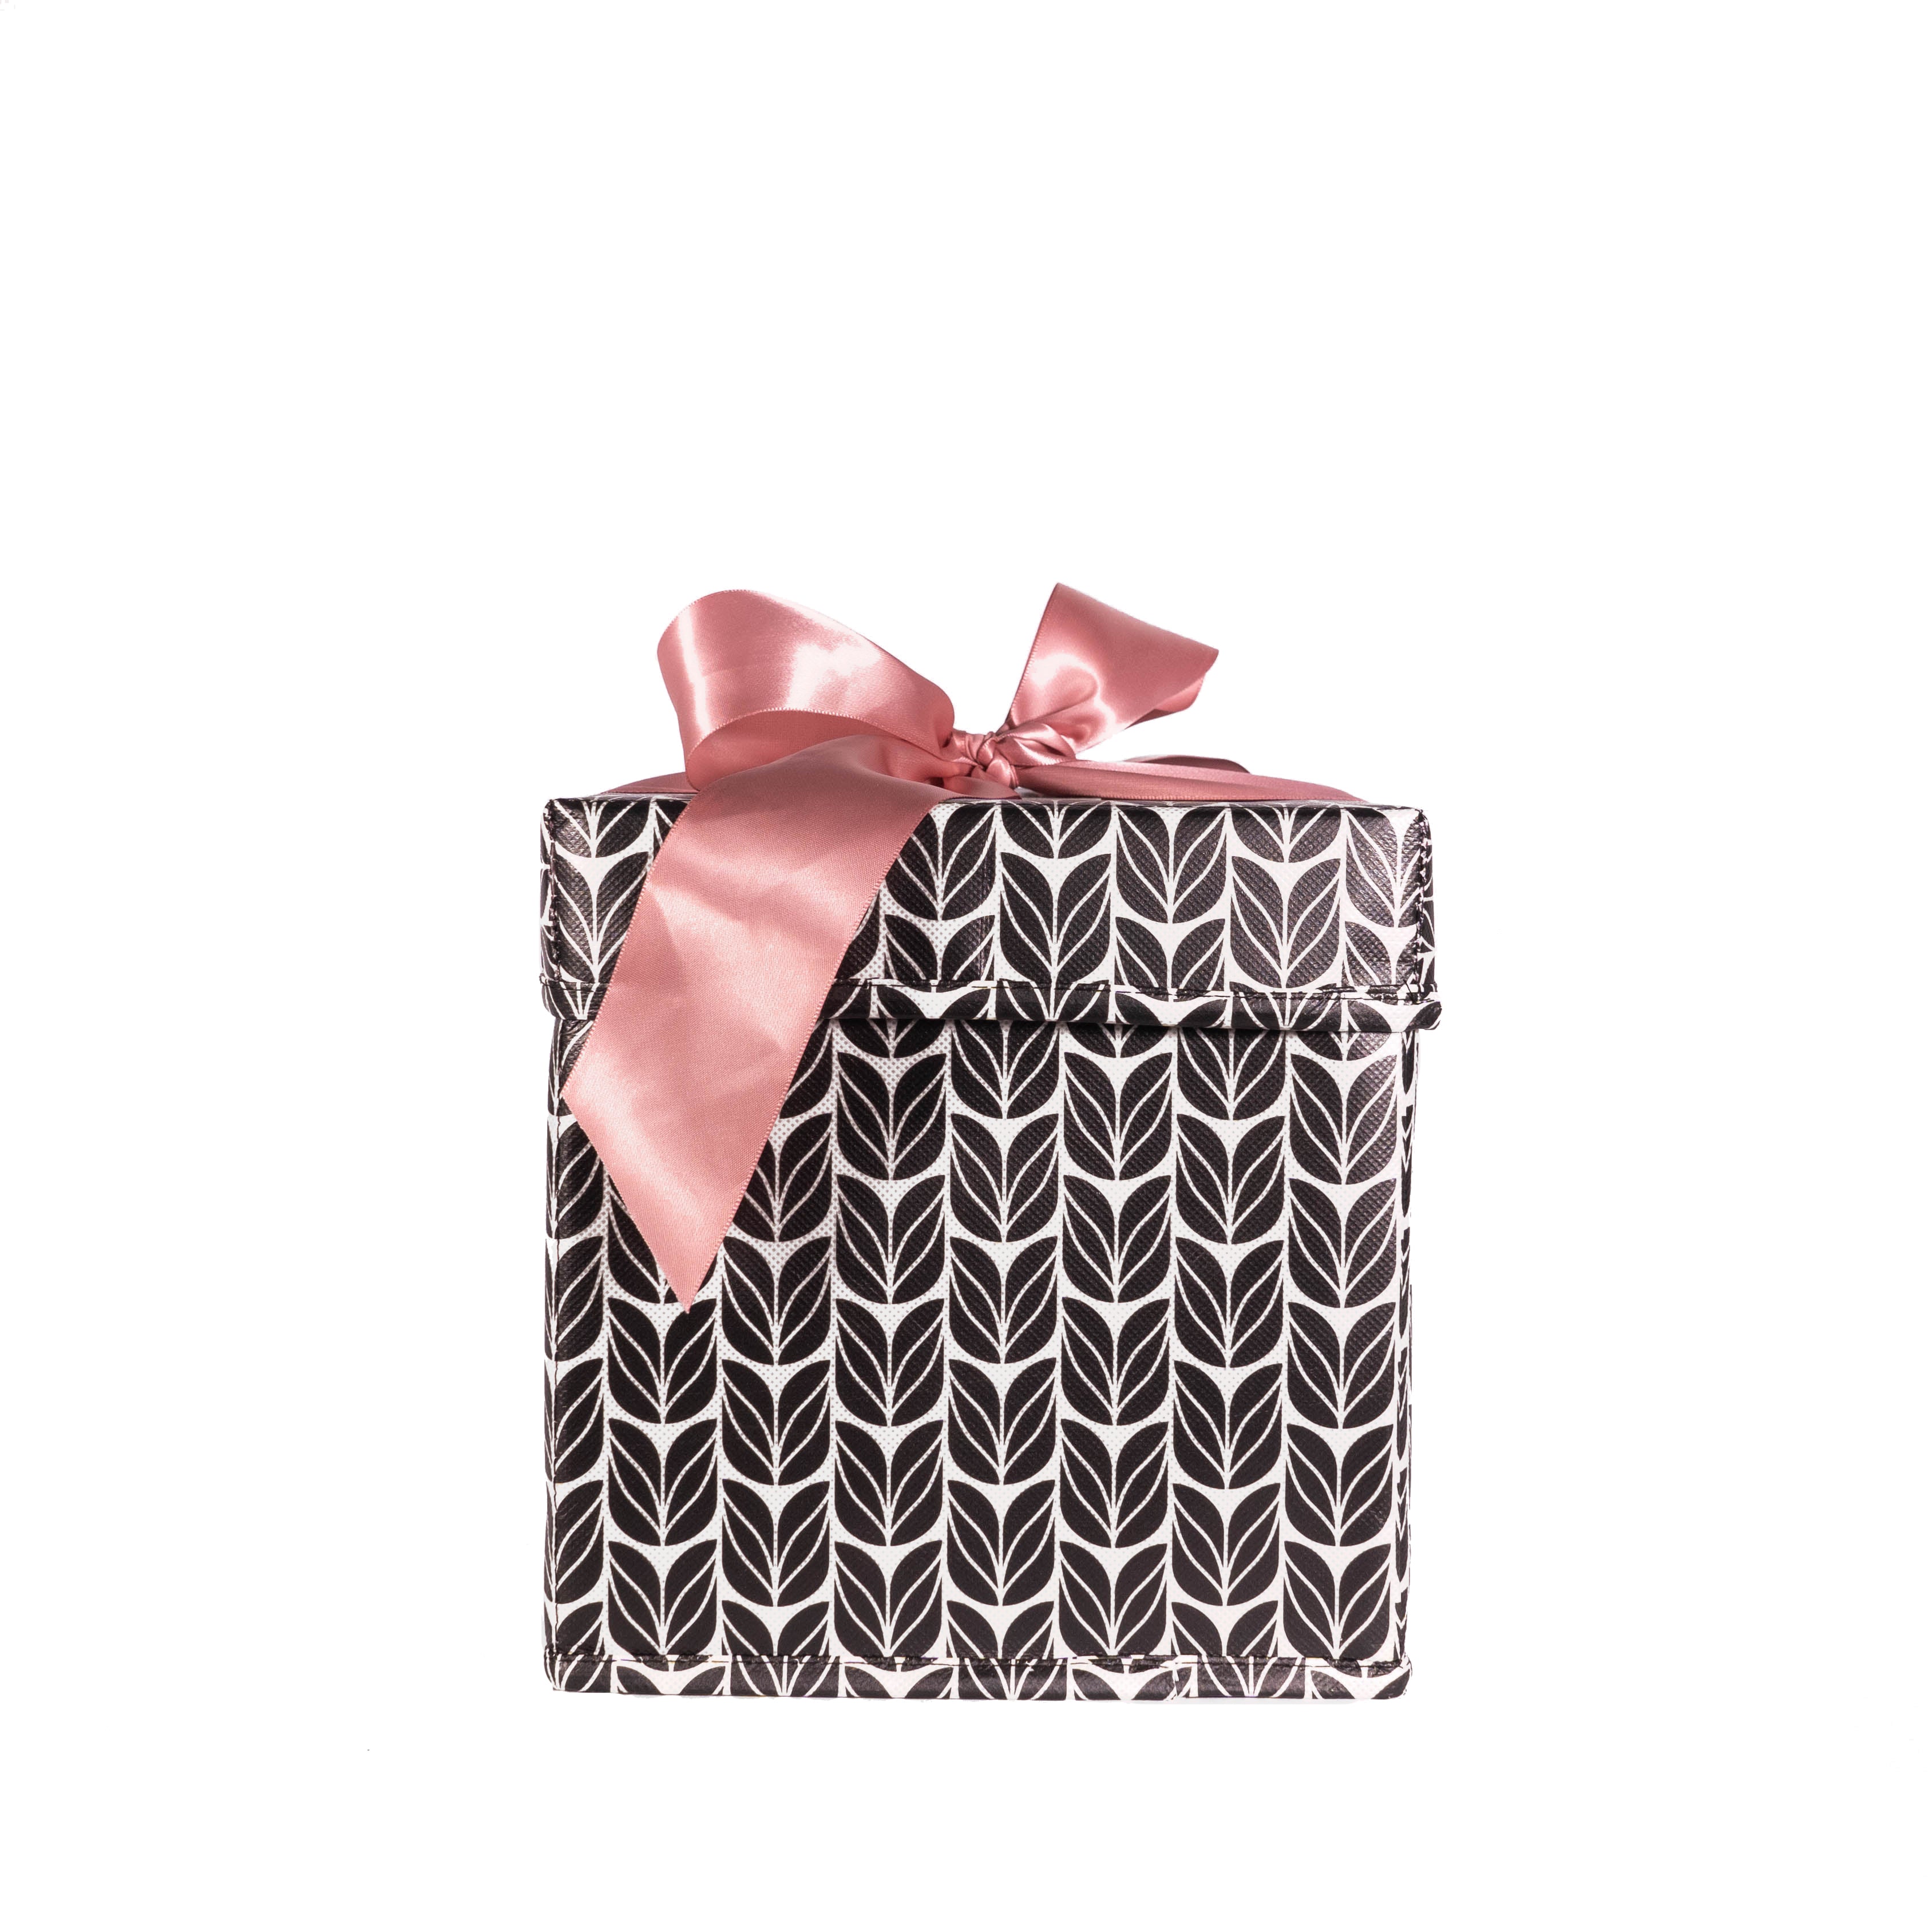 2 Piece Gift Boxes Heavy Duty with Ribbon Closure Built-In to the  Collapsible Reusable Gift Box